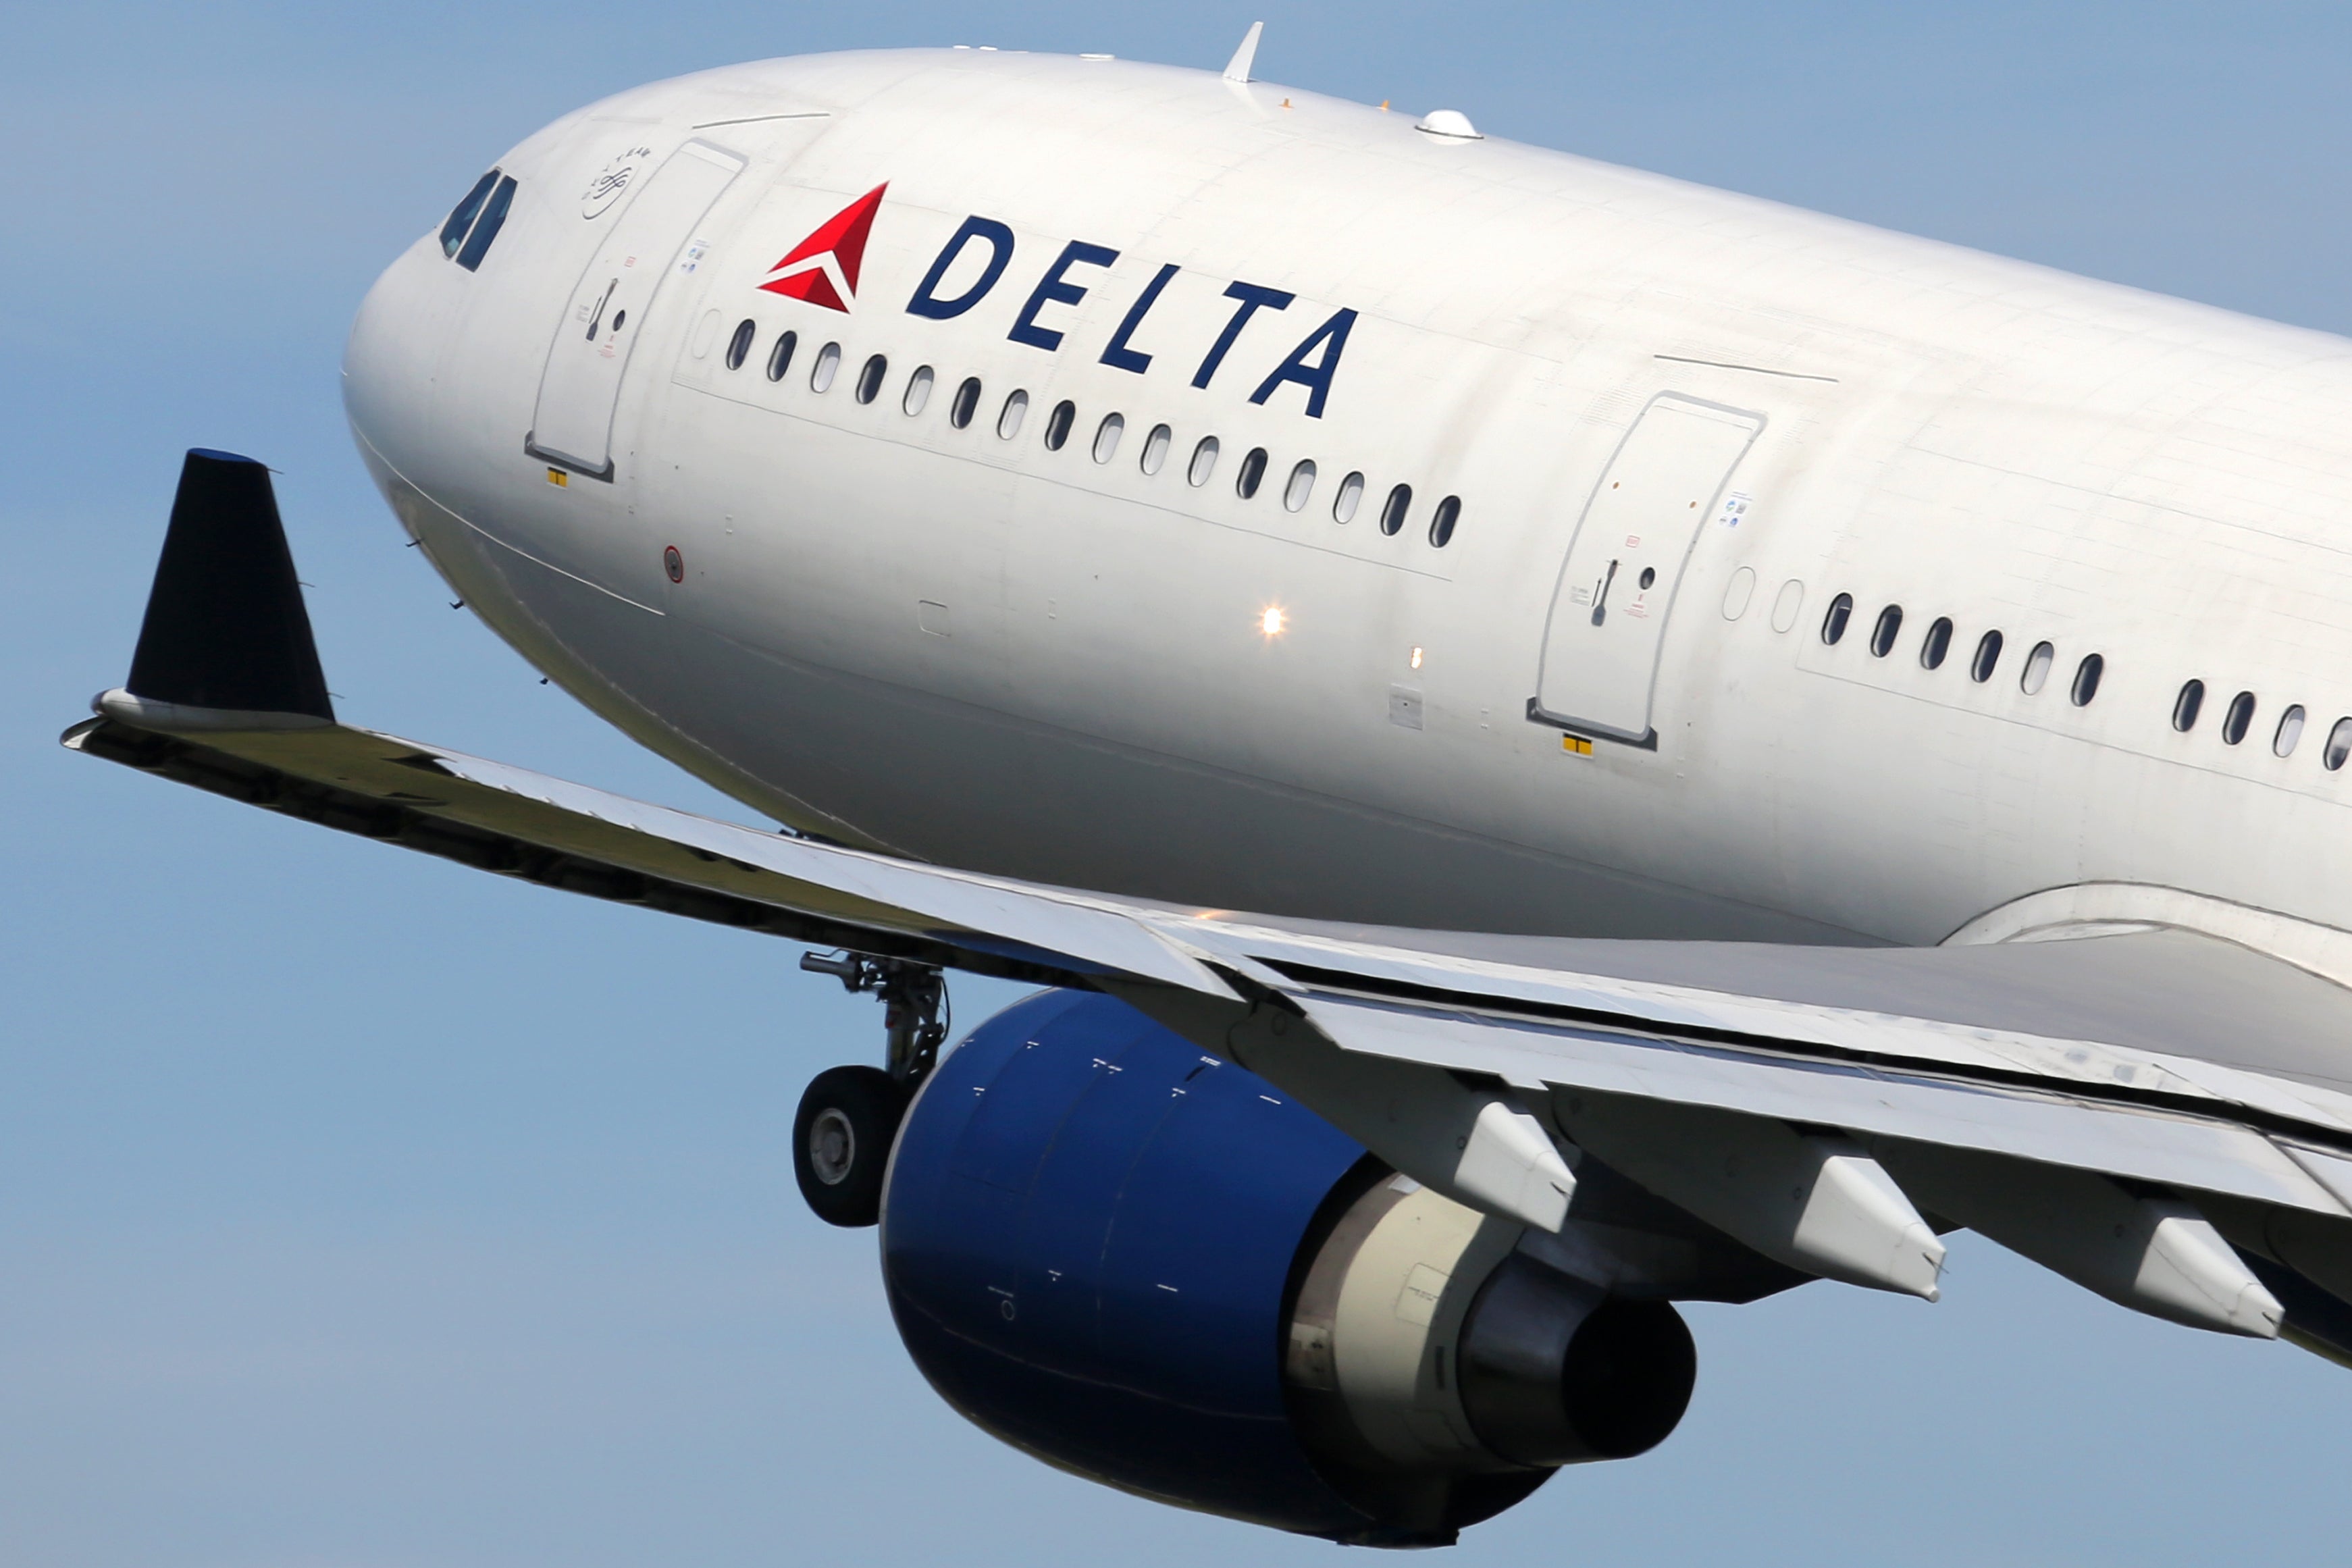 Delta wants to create a shared airline ‘no fly’ list